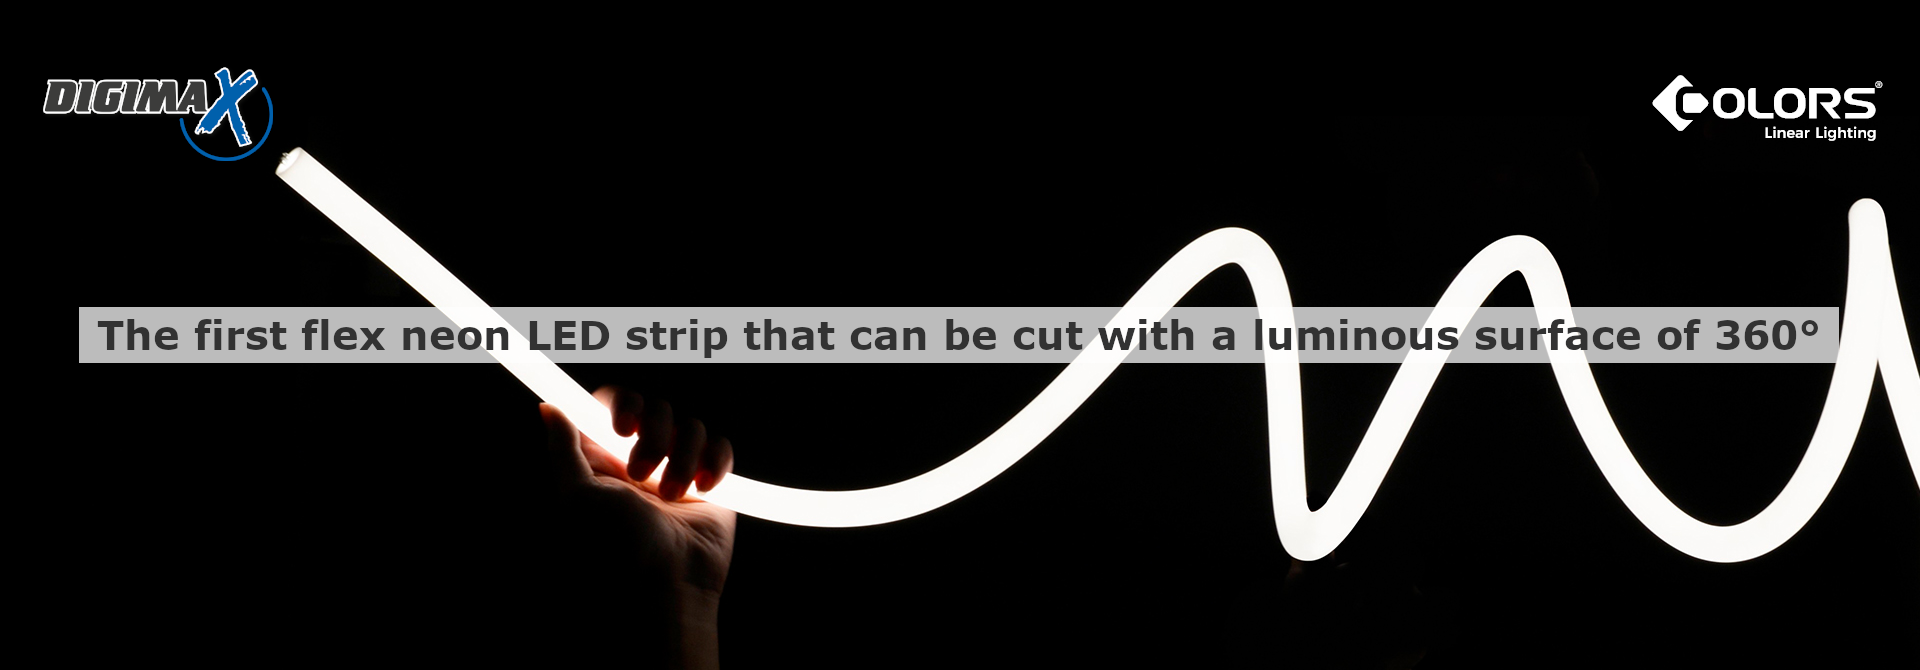 The first flex neon LED strip that can be cut with a luminous surface of 360°